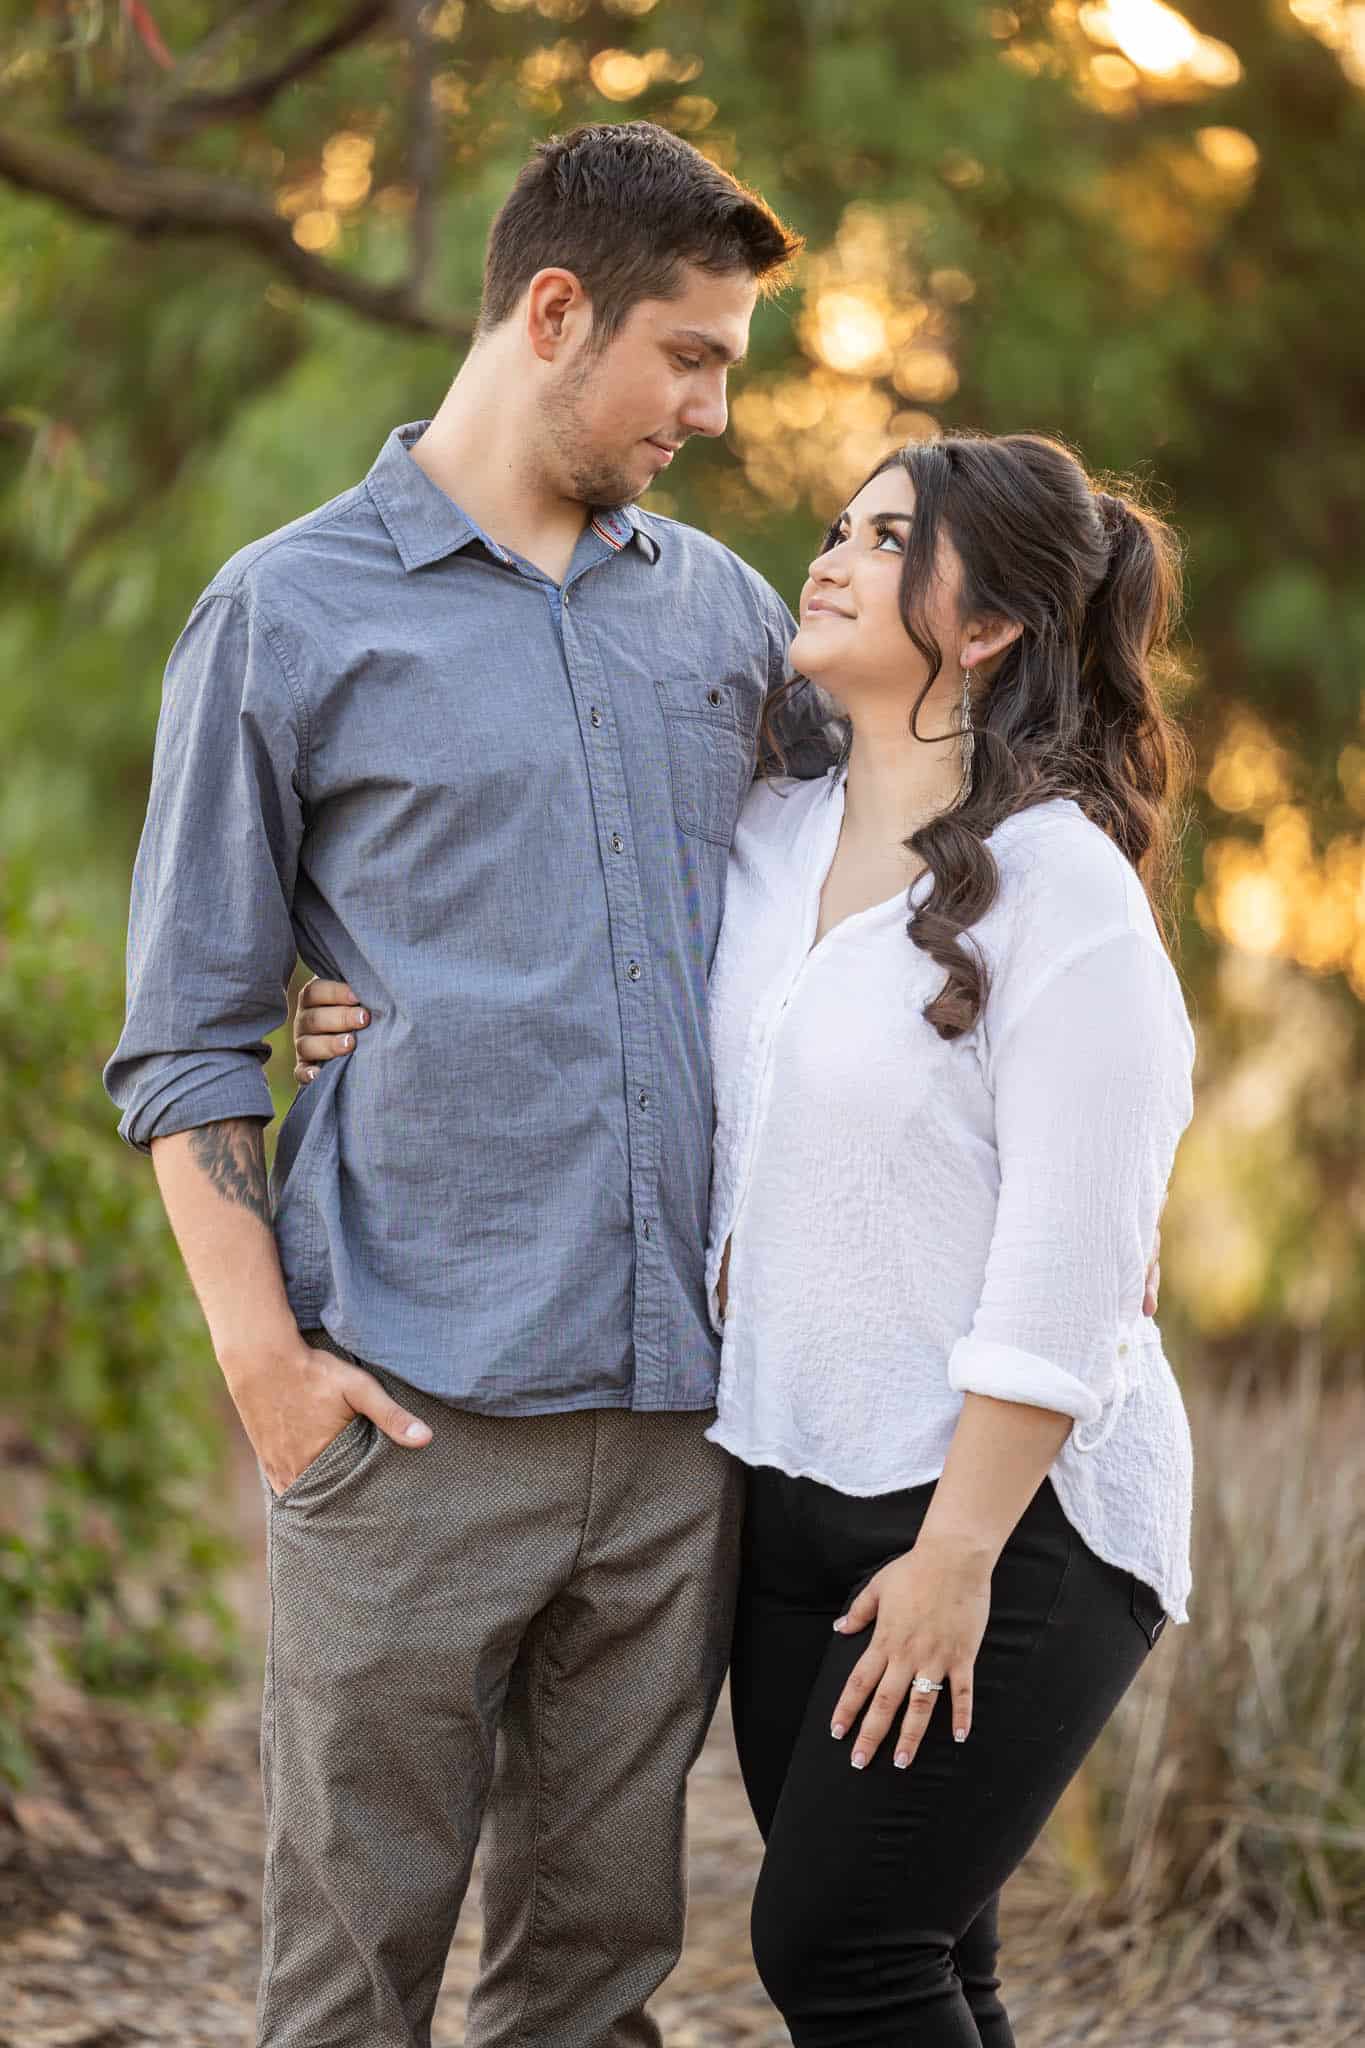 Thousand Oaks wedding photographer photographs engagement photos of man and woman together in a wooded area